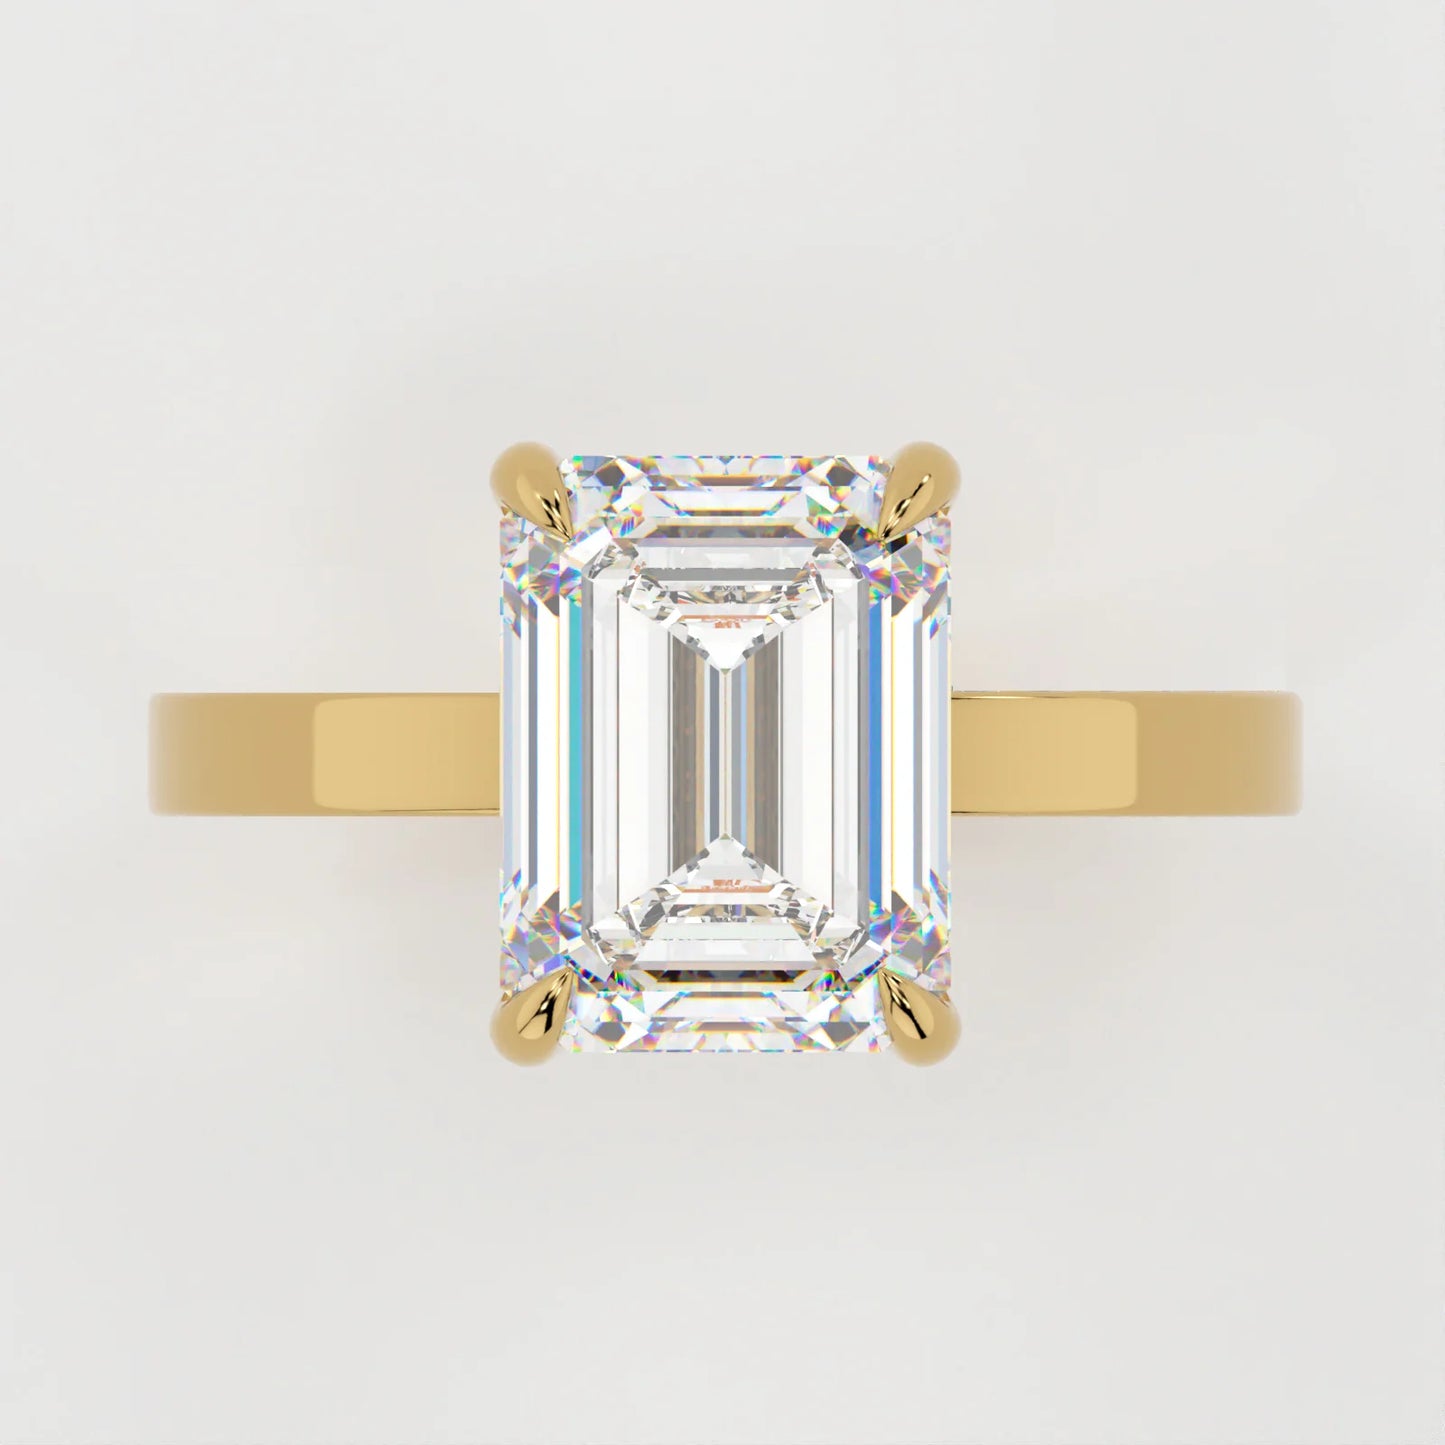 3 Carat Emerald Cut Parallel Solitaire Engagement Ring